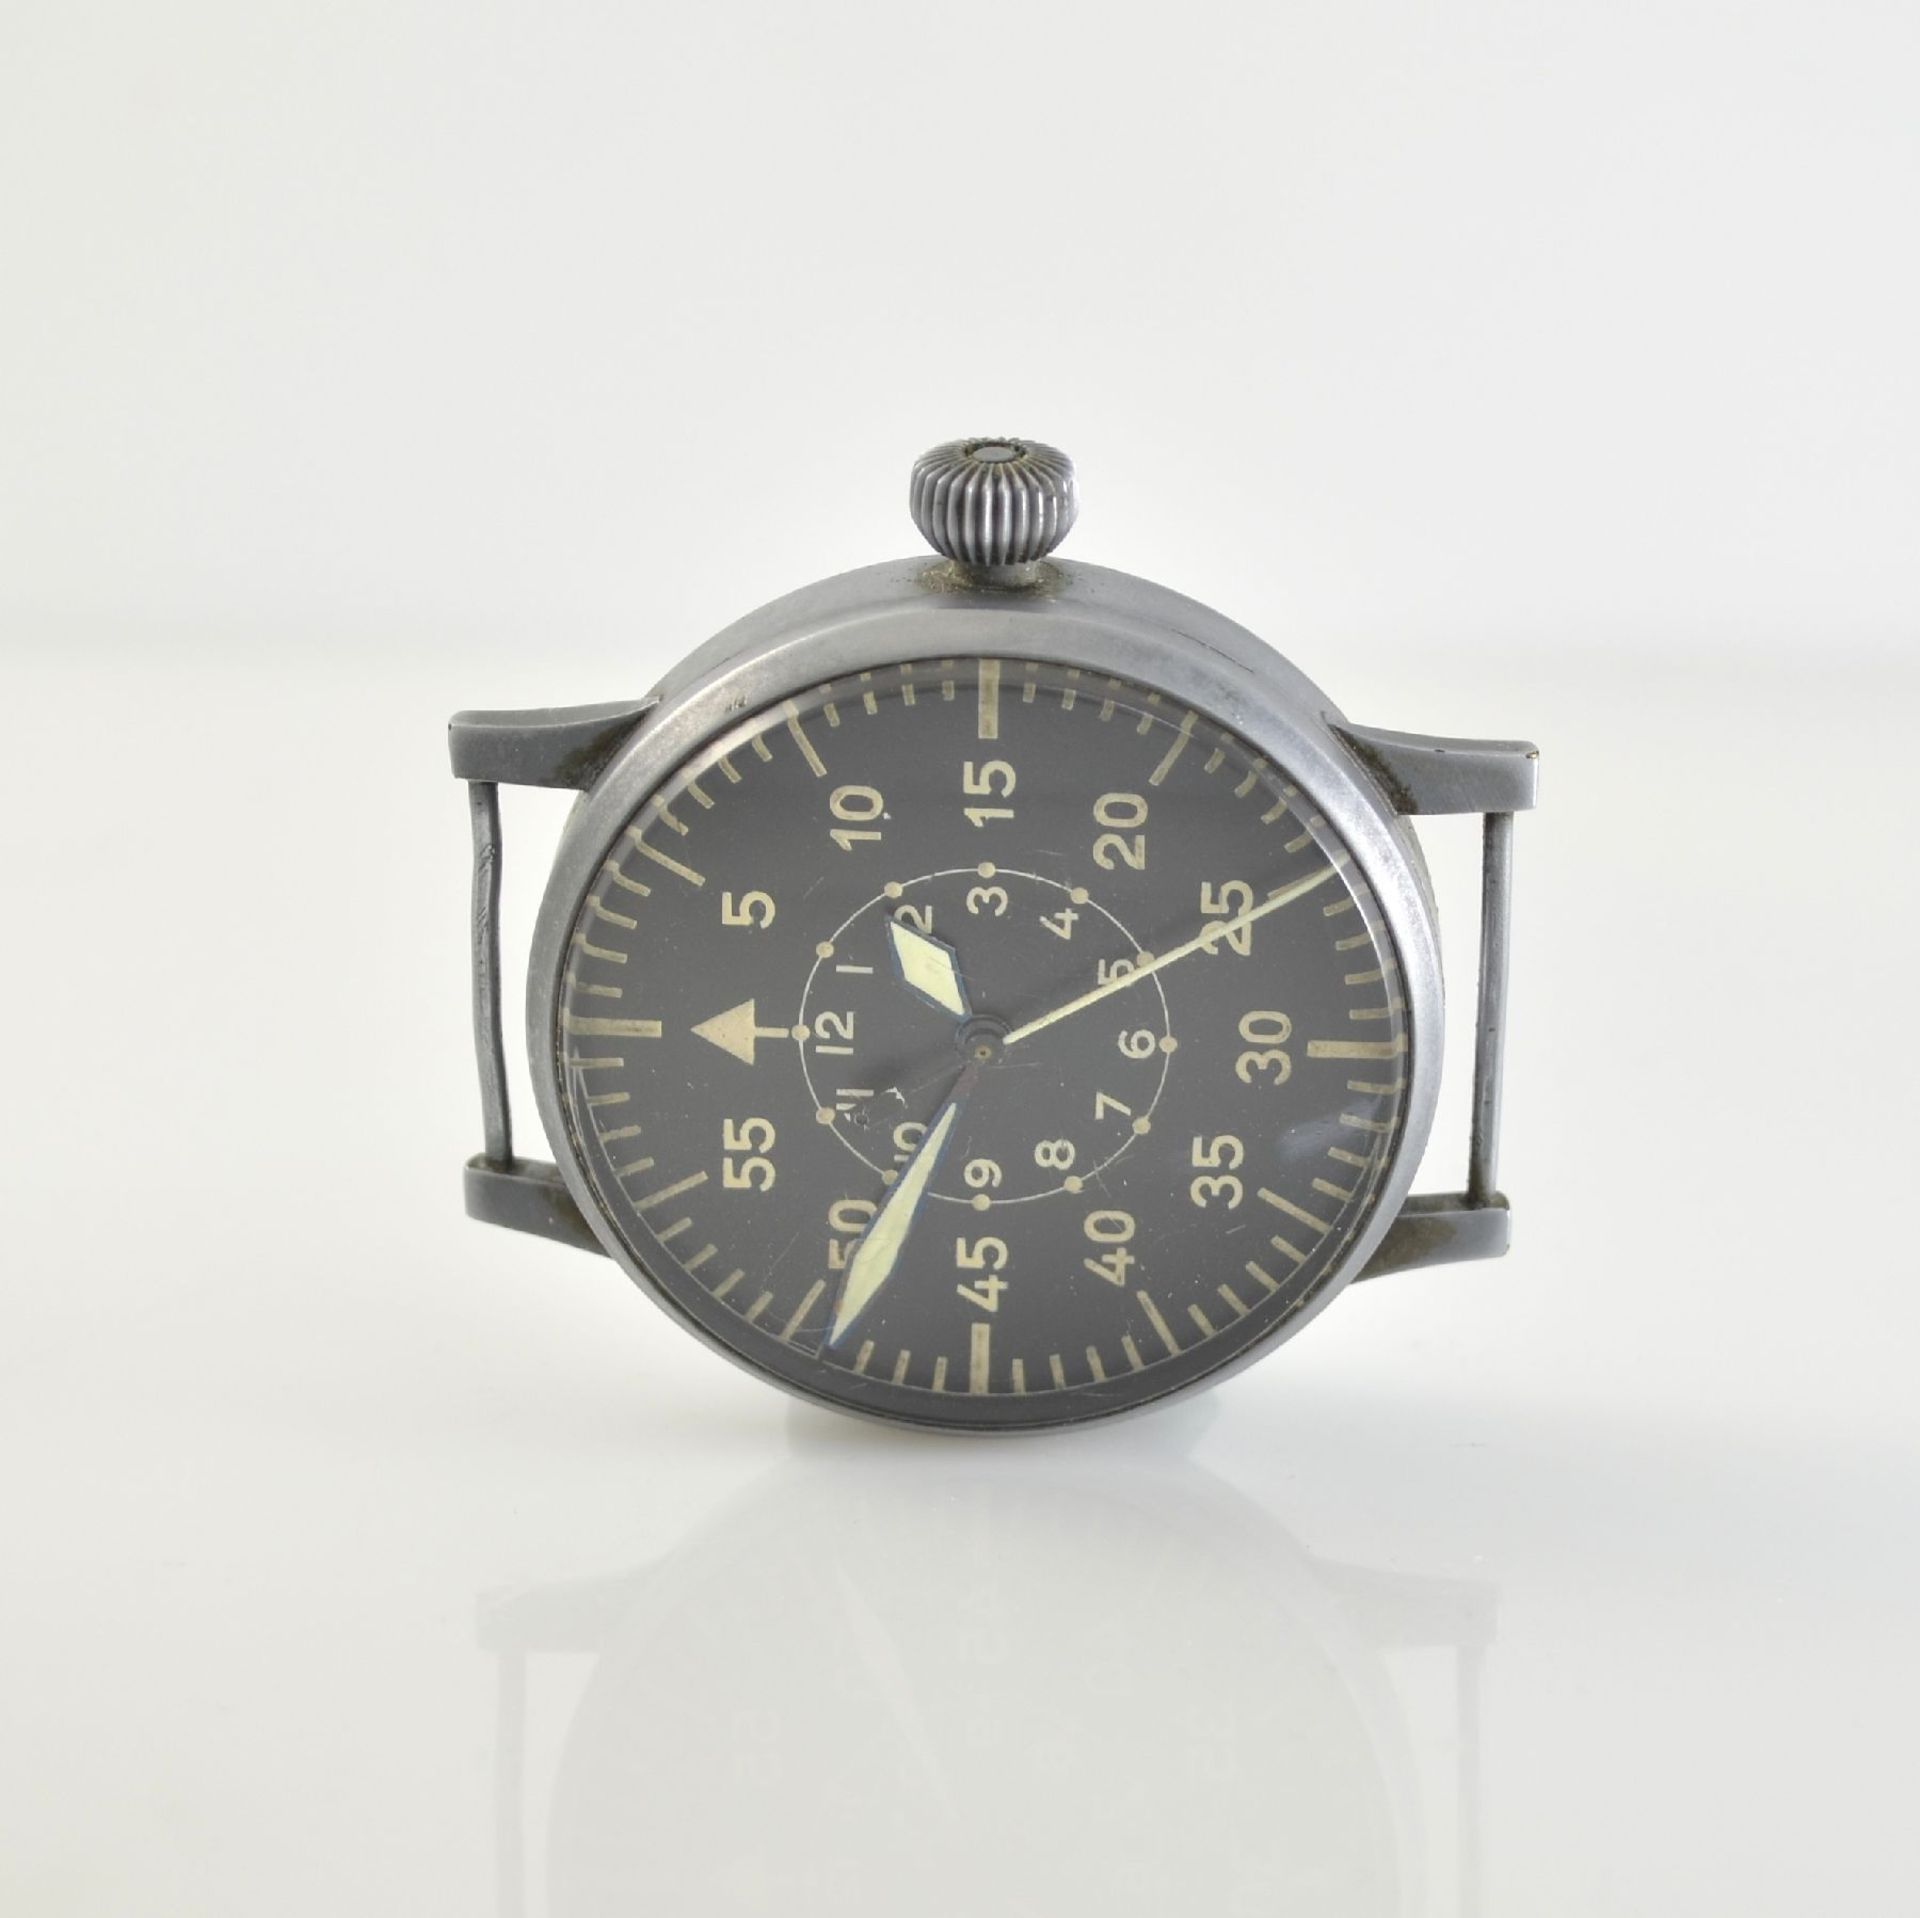 LACO aviation watch FL 23883, Germany around 1940, manual winding, grey lacquered metal case, snap